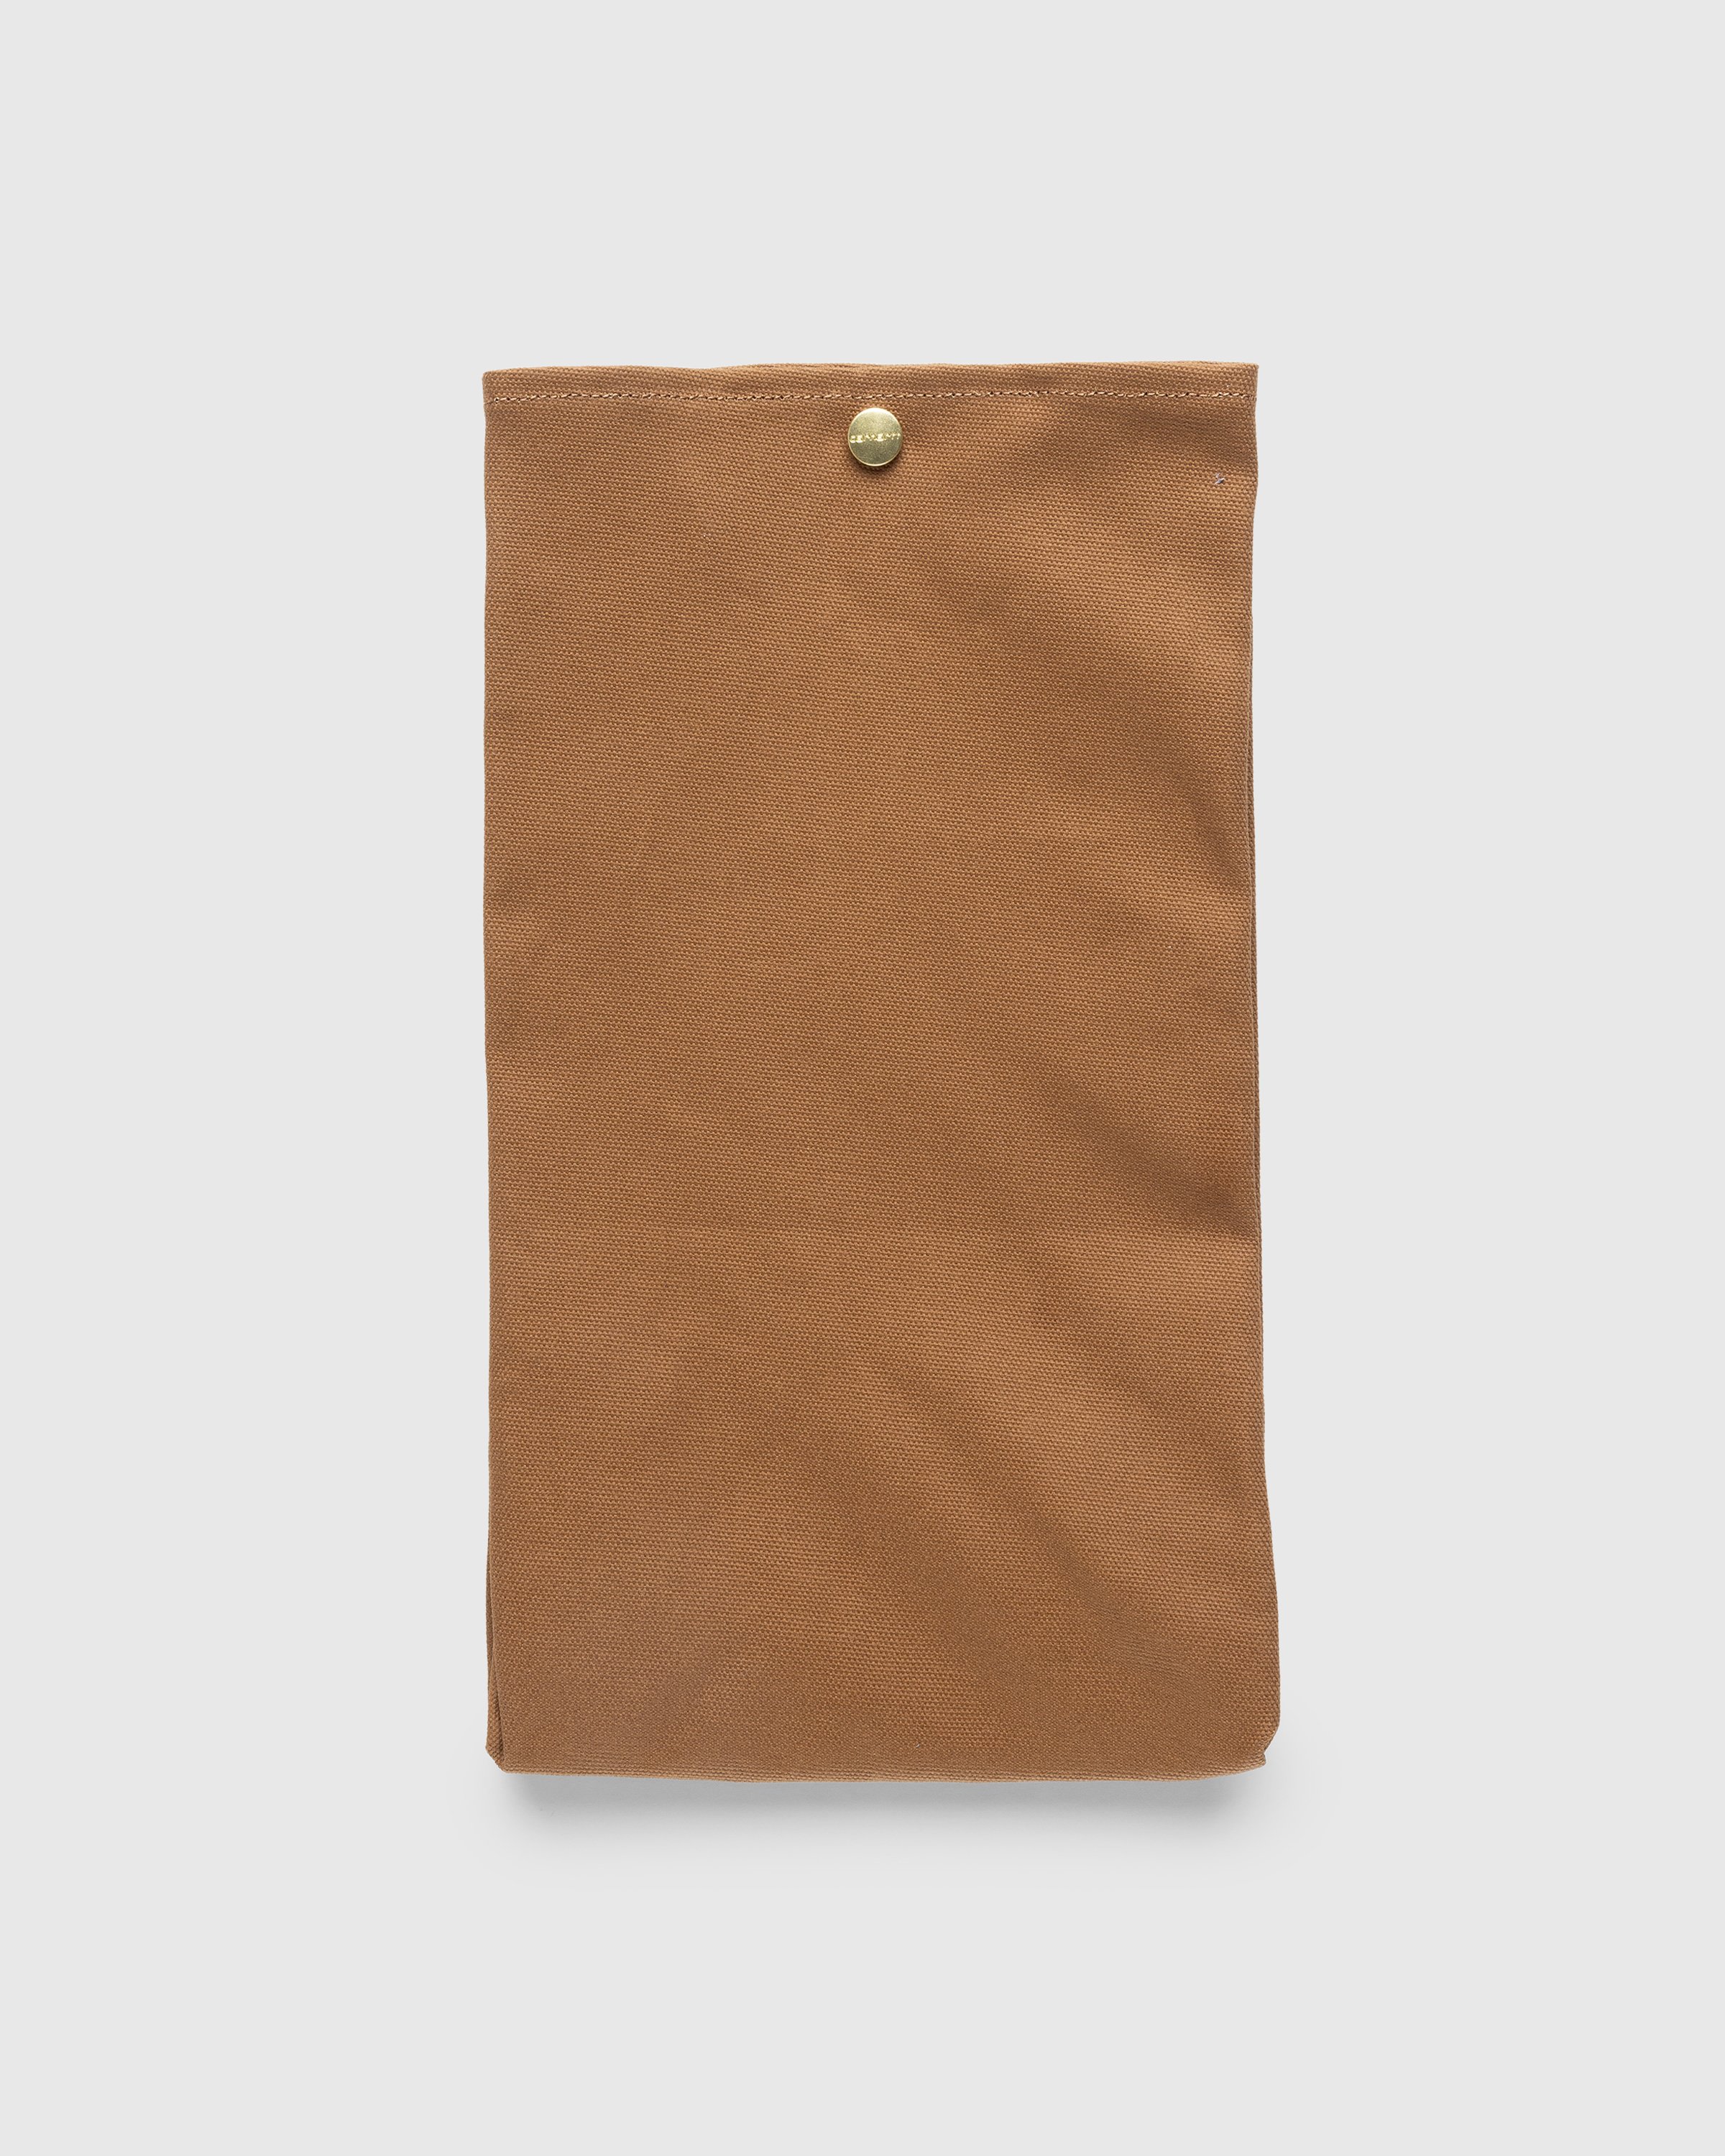 Carhartt WIP - Lunch Bag Hamilton Brown - Lifestyle - Brown - Image 3